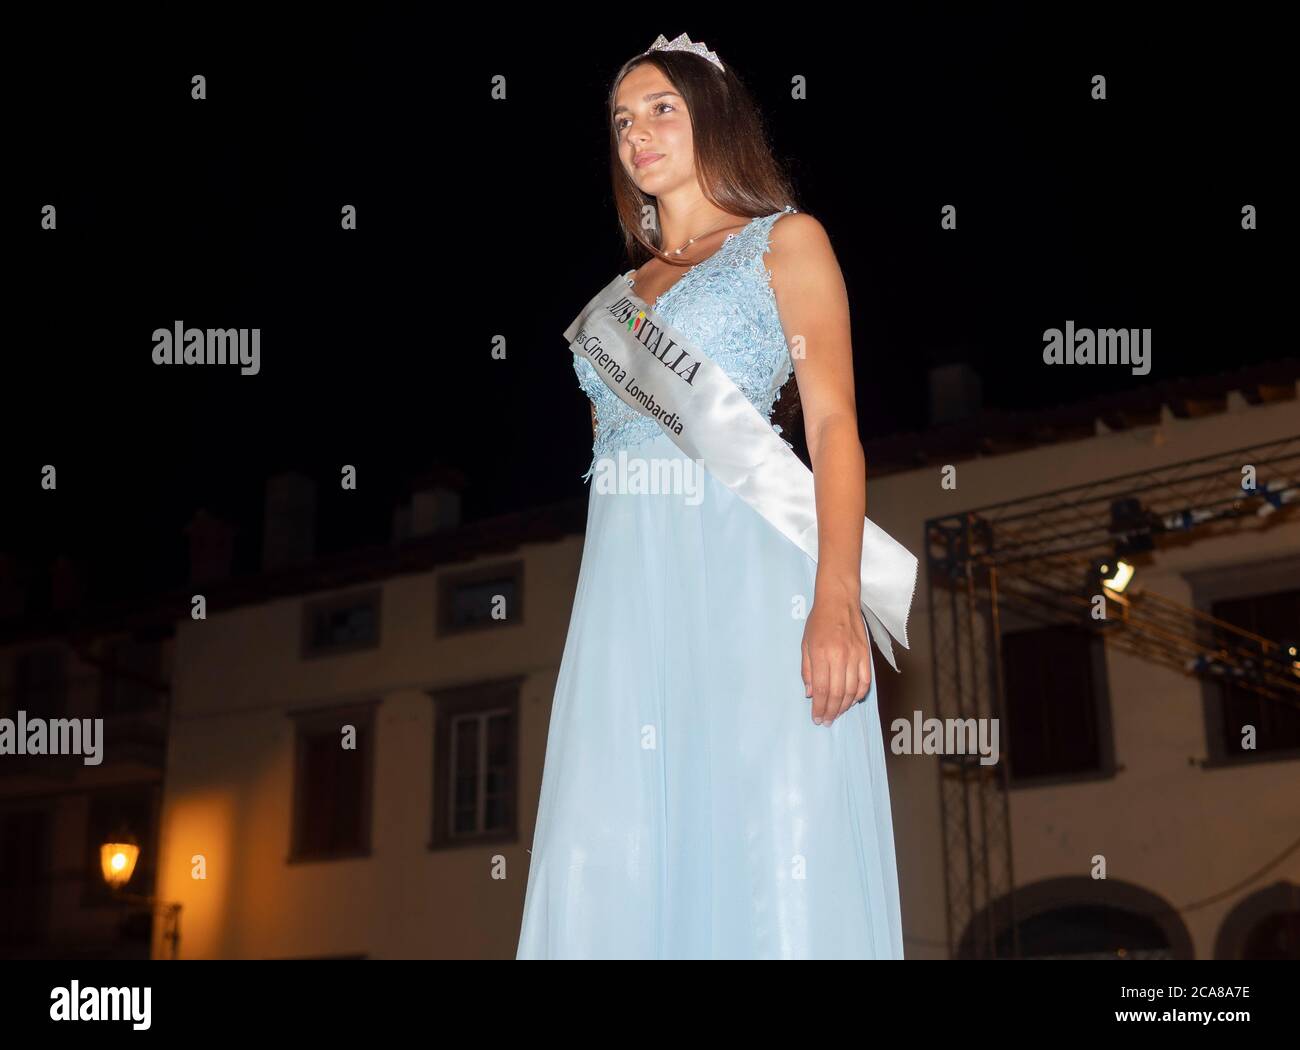 Here is the first provincial selection of Miss Italia Lombardia after the long stop for the lock down. An important day the first beauty event Stock Photo